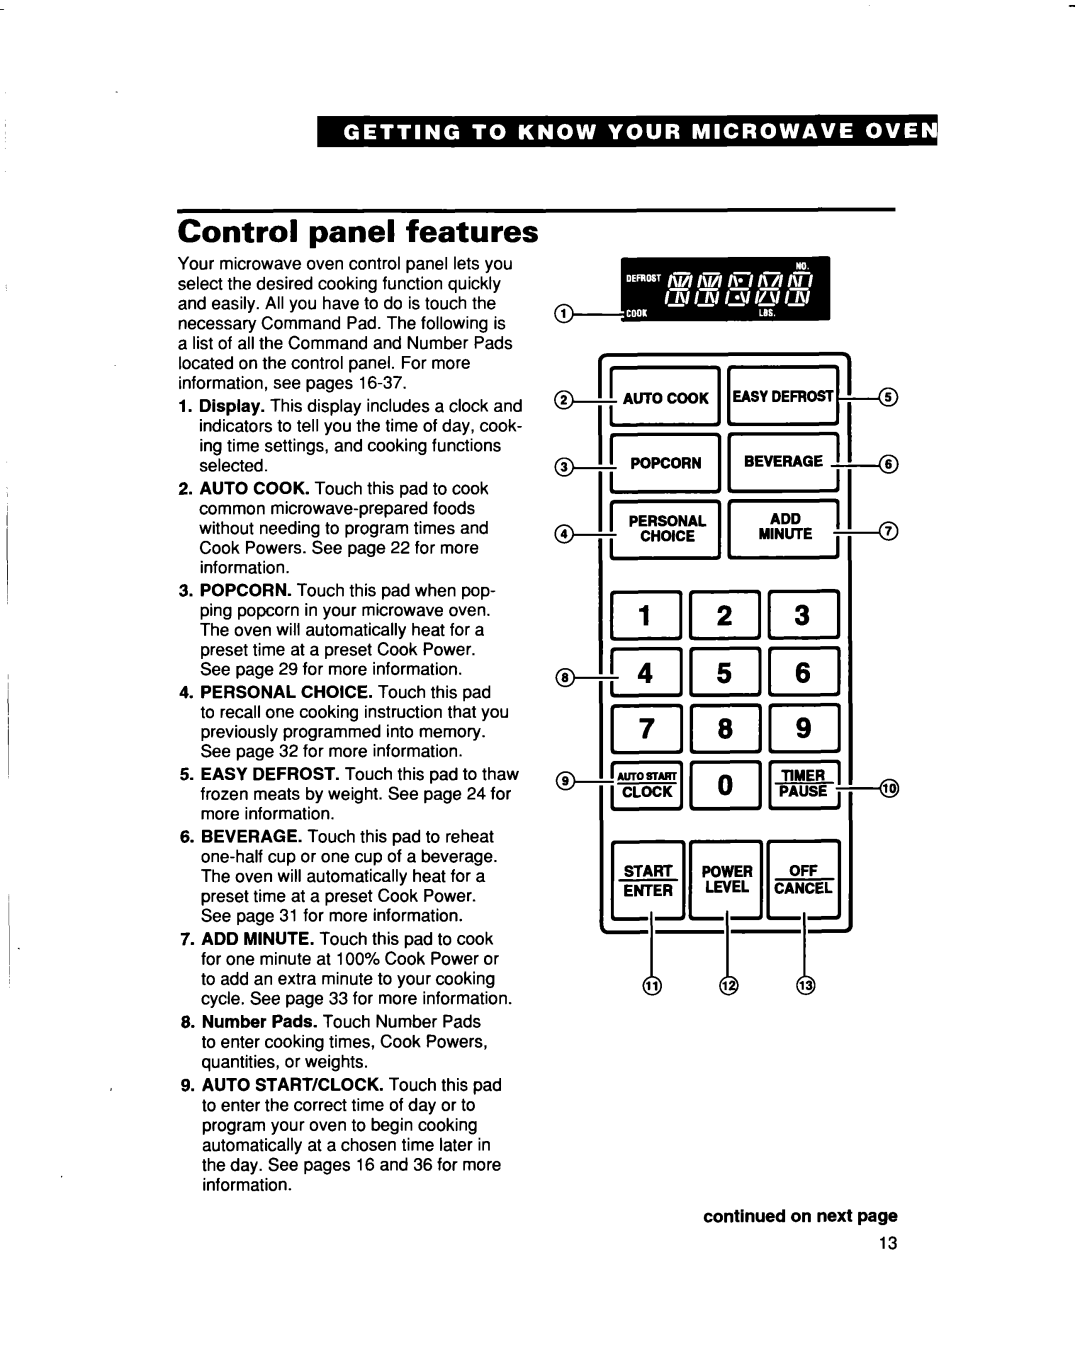 Whirlpool MT5120XAQ installation instructions Control panel features, IIIIt, continued on next page 